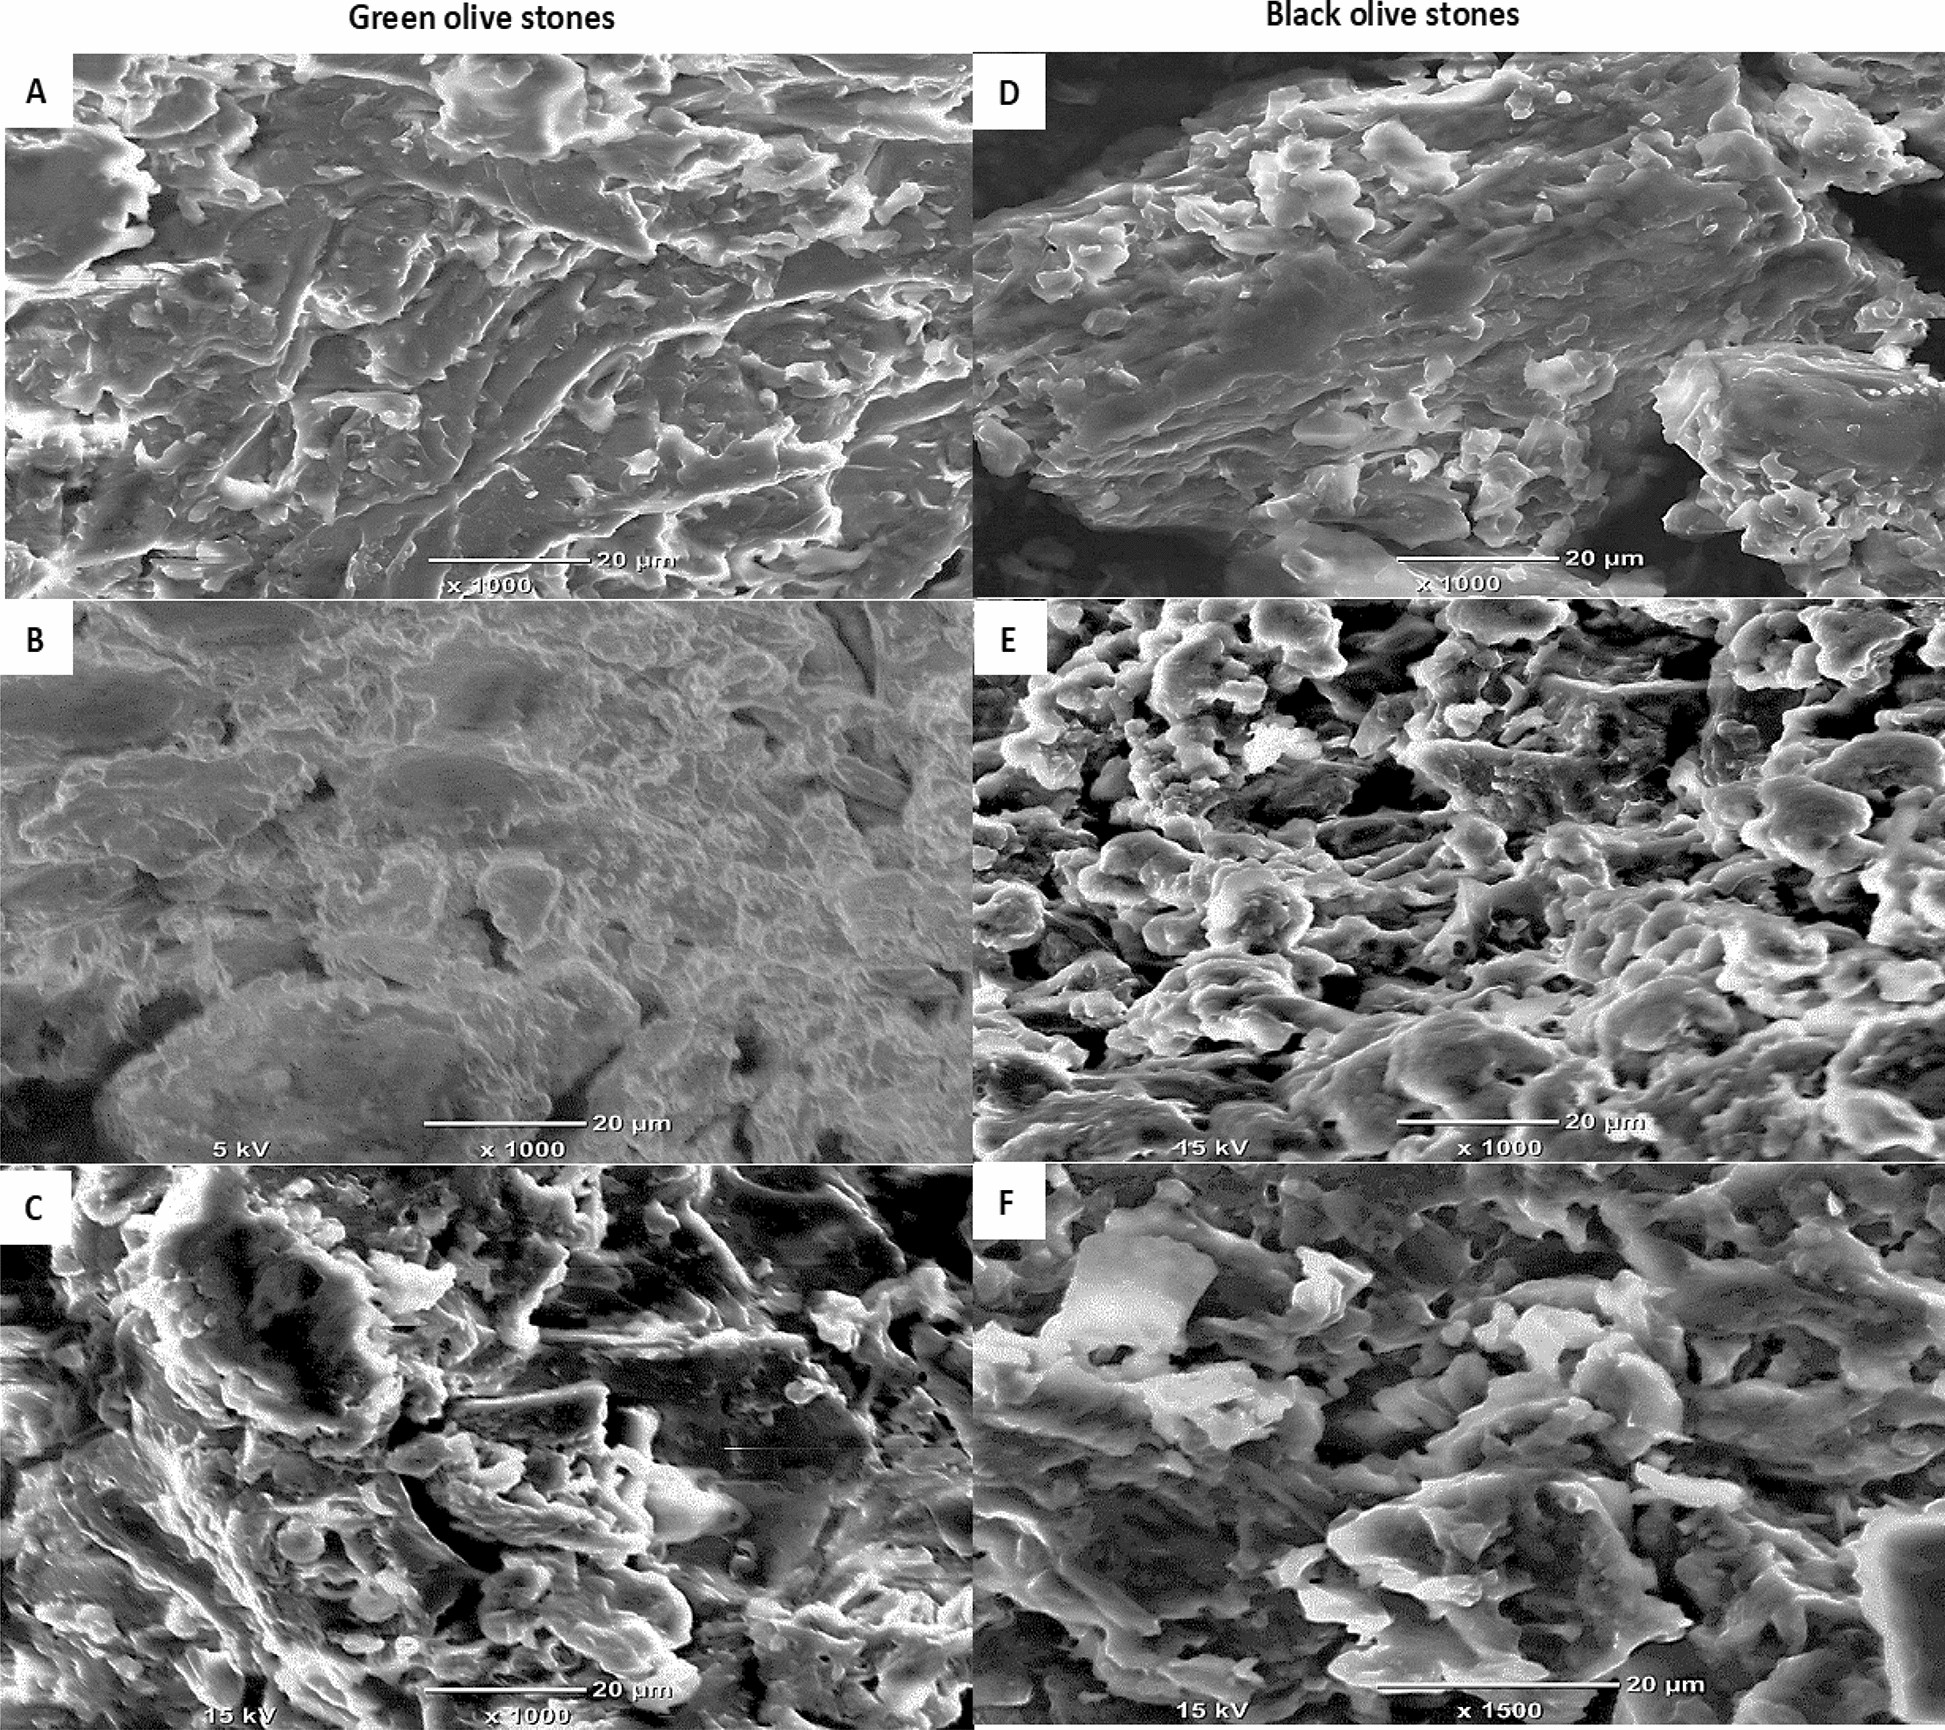 Mechanistic understanding of the adsorption and thermodynamic aspects of cationic methylene blue dye onto cellulosic olive stones biomass from wastewater Reports